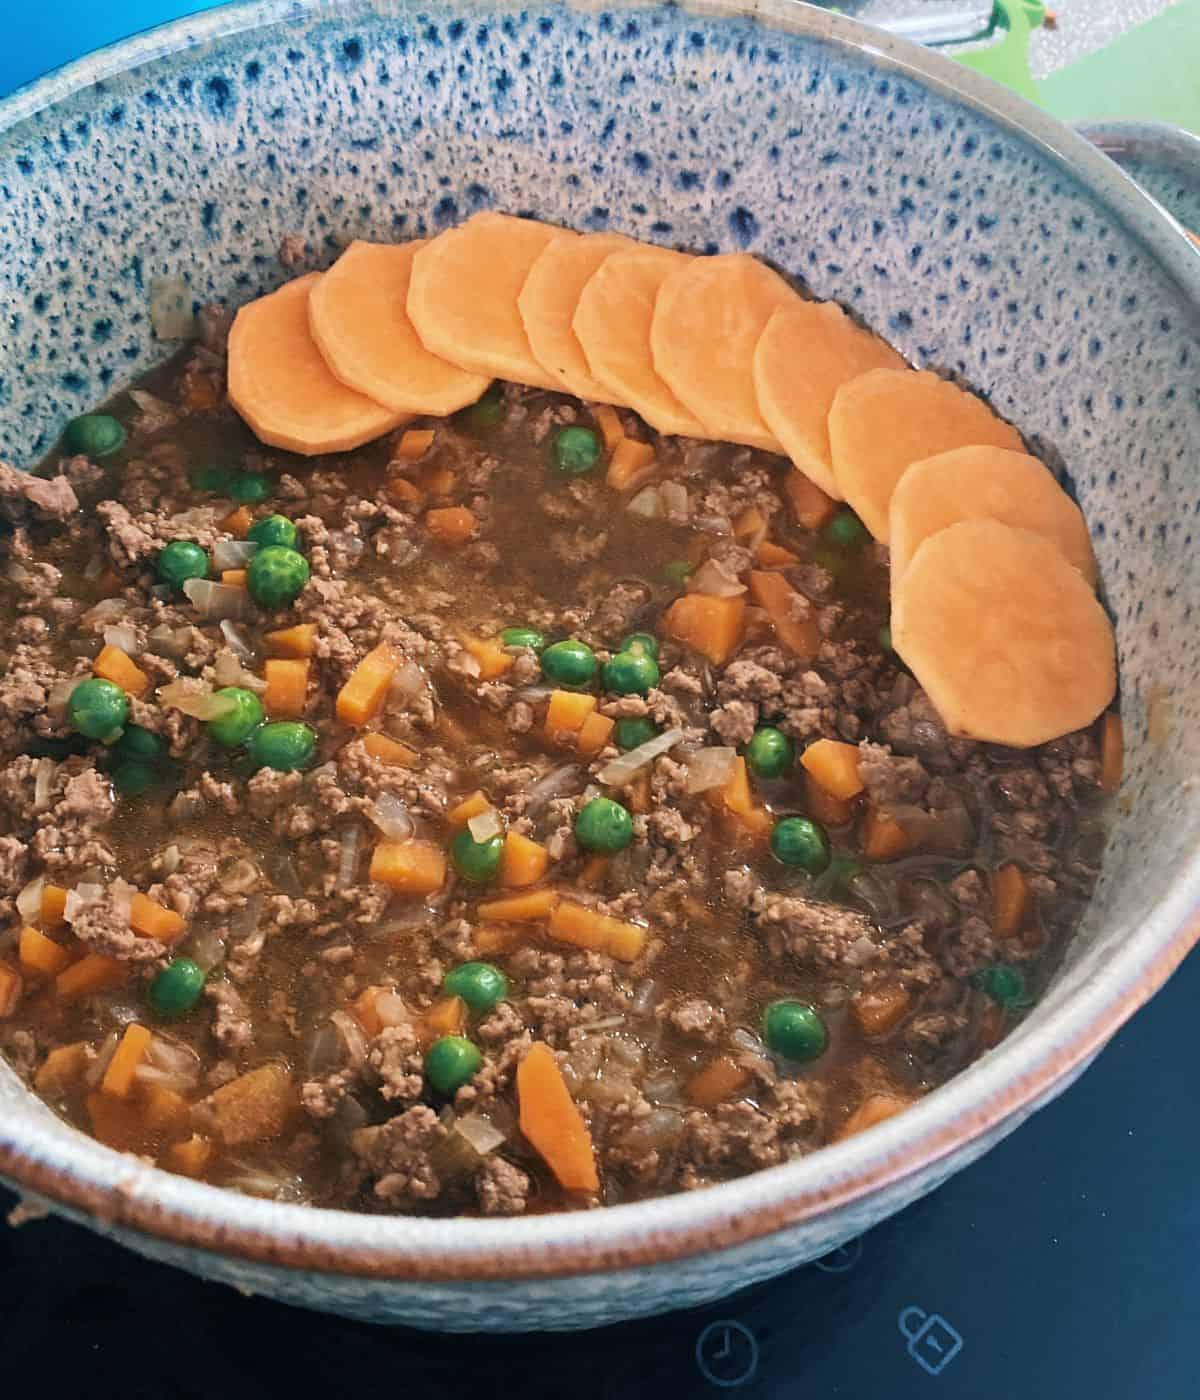 cooked lamb mince carrot and pea mixture being topped with sliced sweet potato